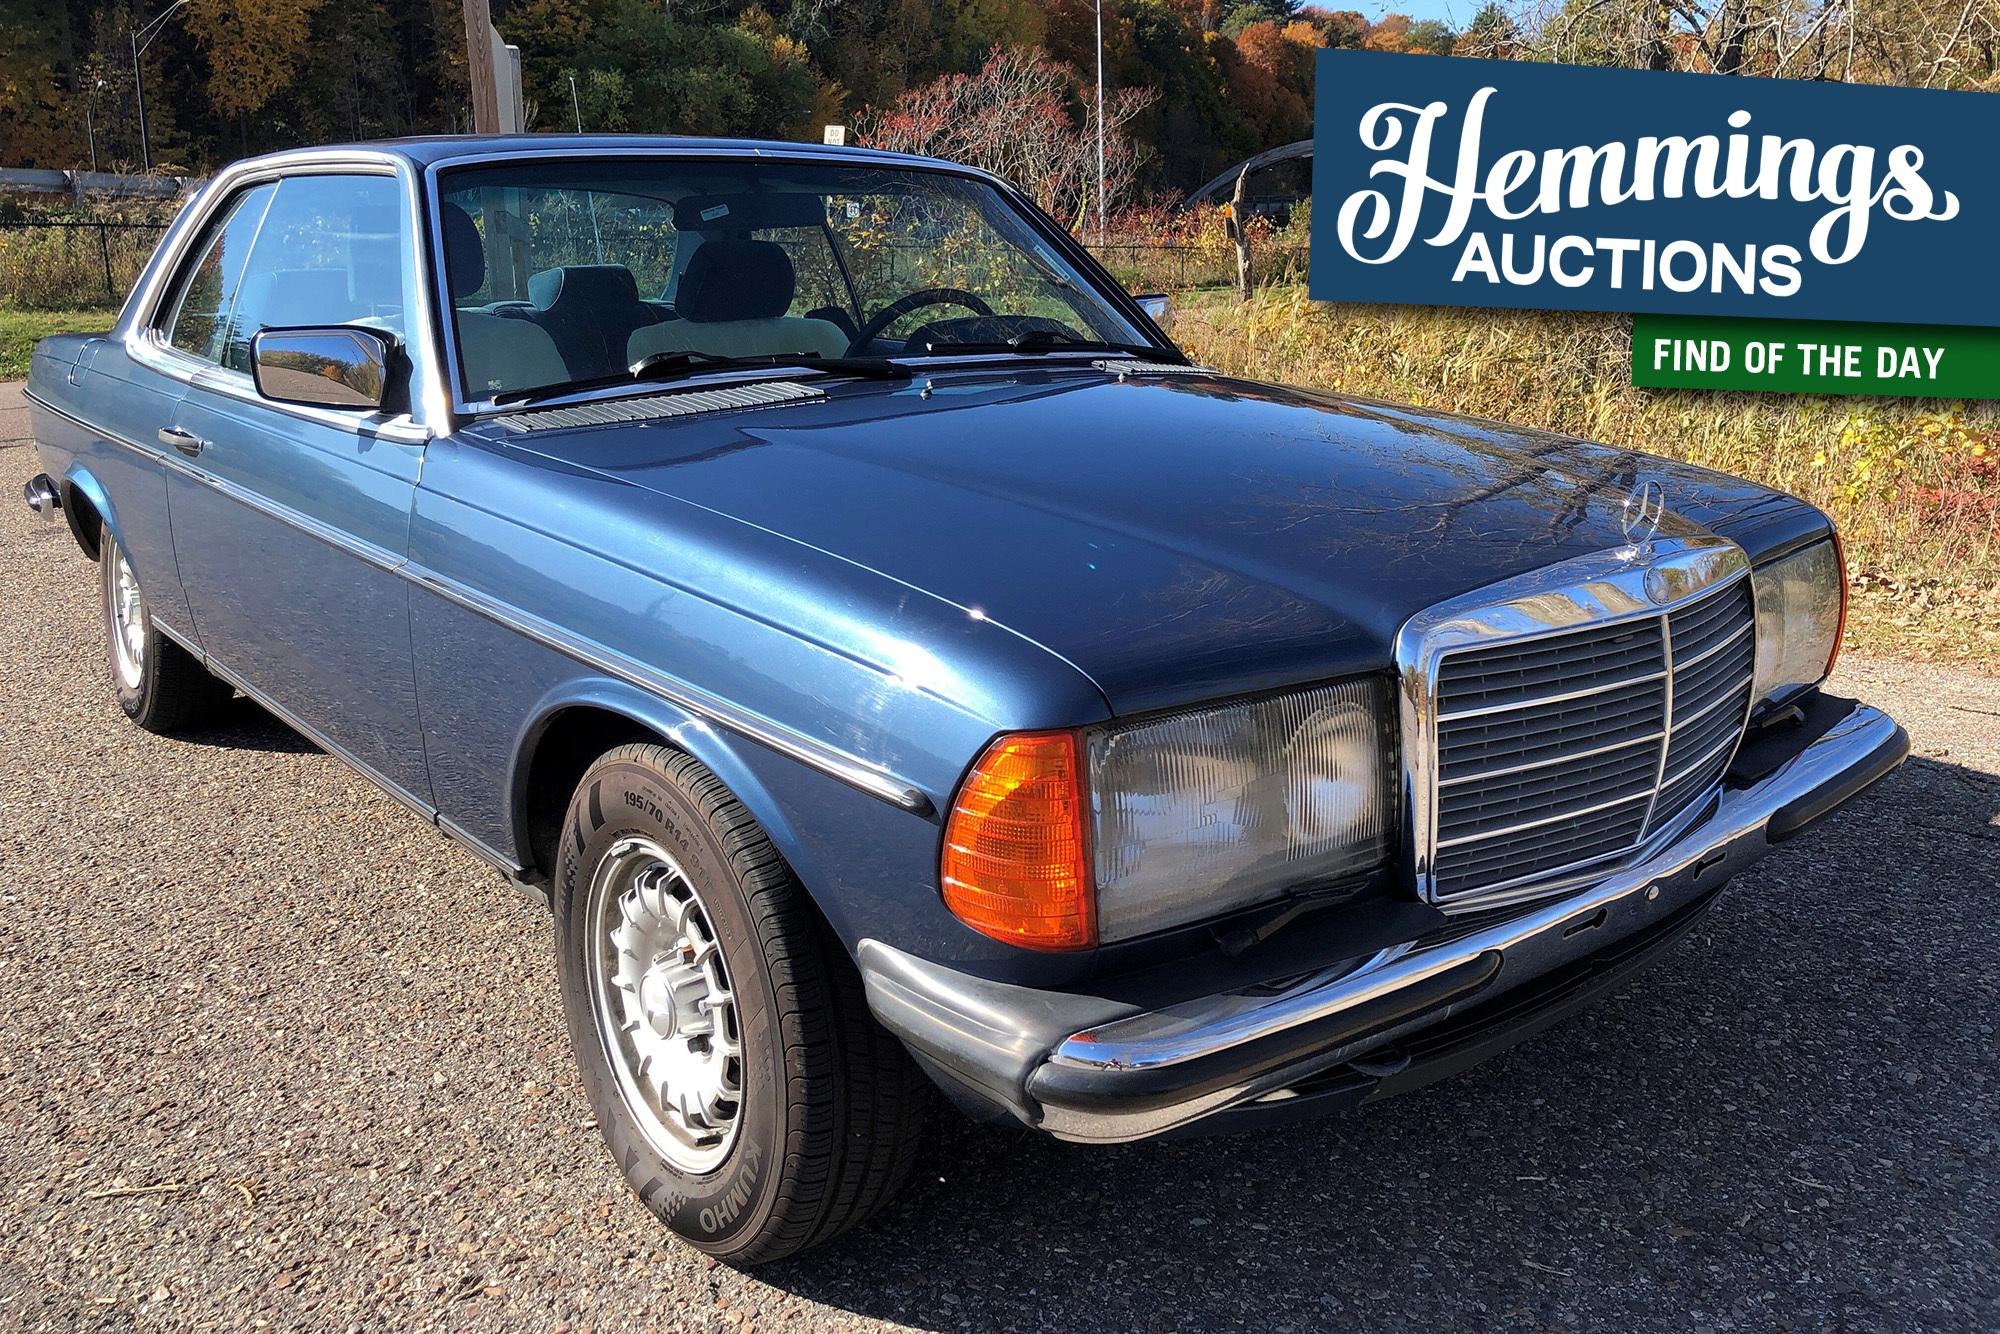 Rarely seen in the U.S., this gray market 1984 Mercedes-Benz 230CE Coupe is crossing the block for charity